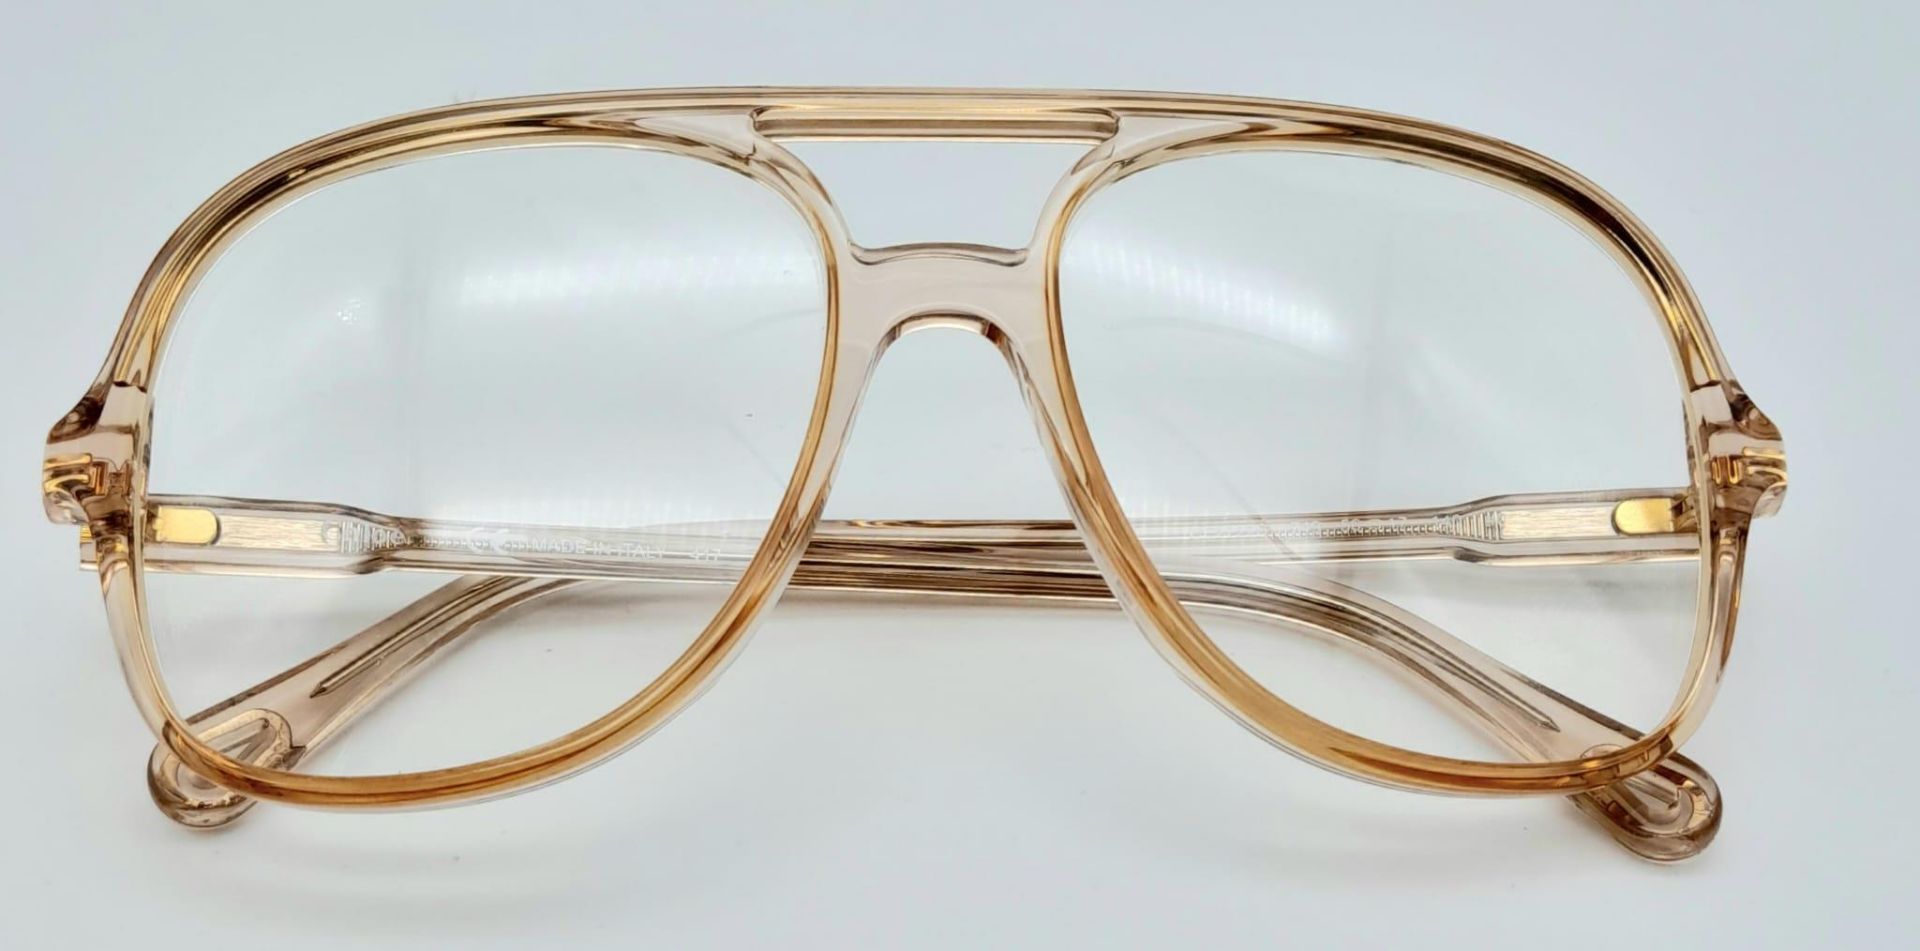 Chloe 'Patty' Eyeglasses. Large navigator shape/style and nude colour, Patty brings a 70s-inspired - Bild 3 aus 11